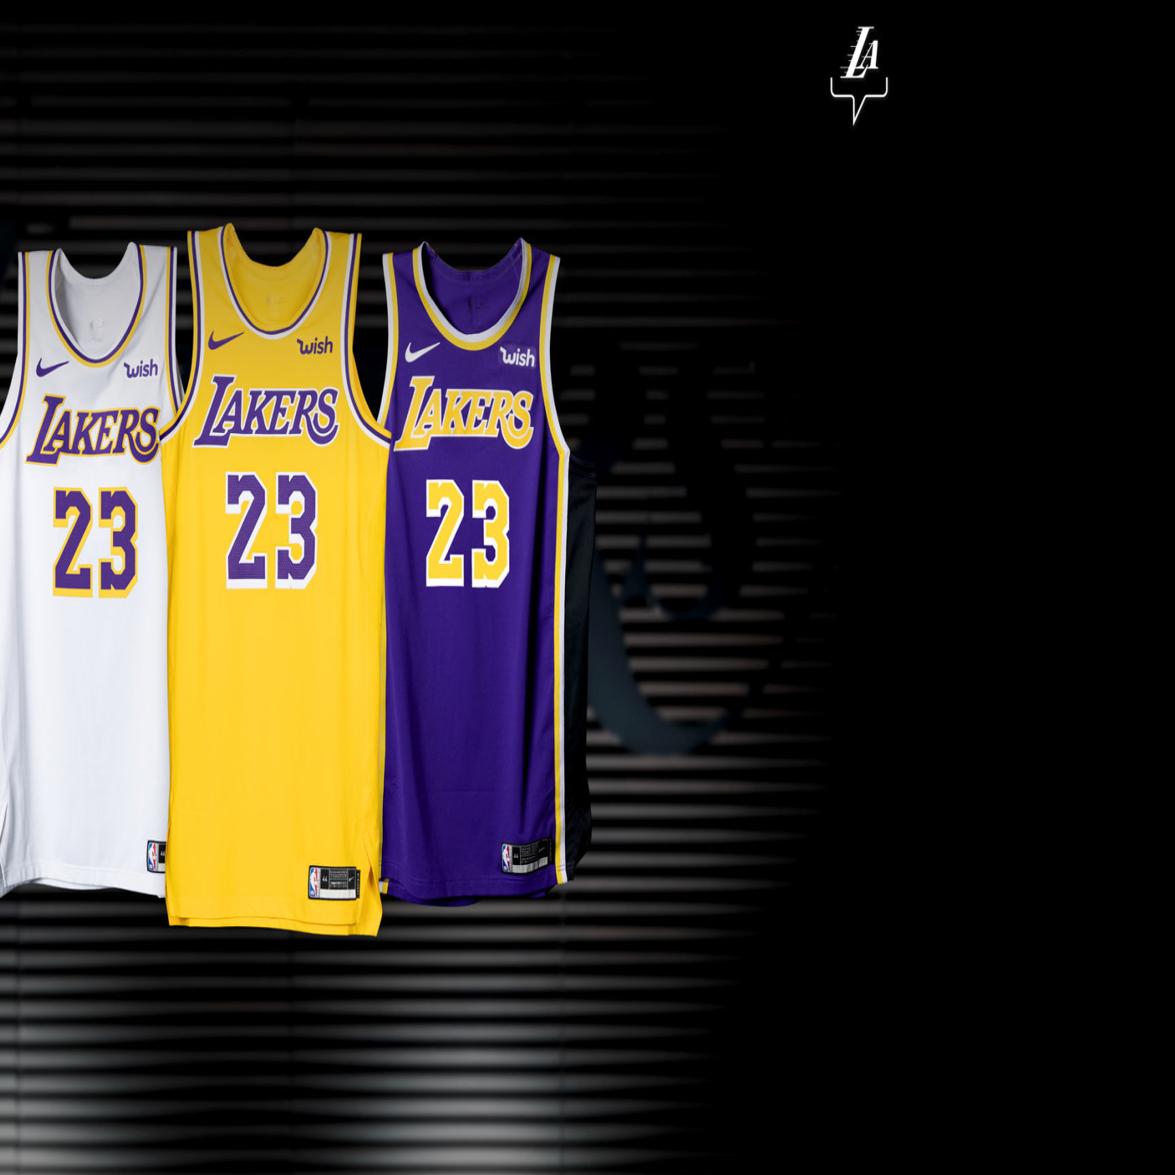 Los Angeles Lakers unveil new jersey design, Local Sports